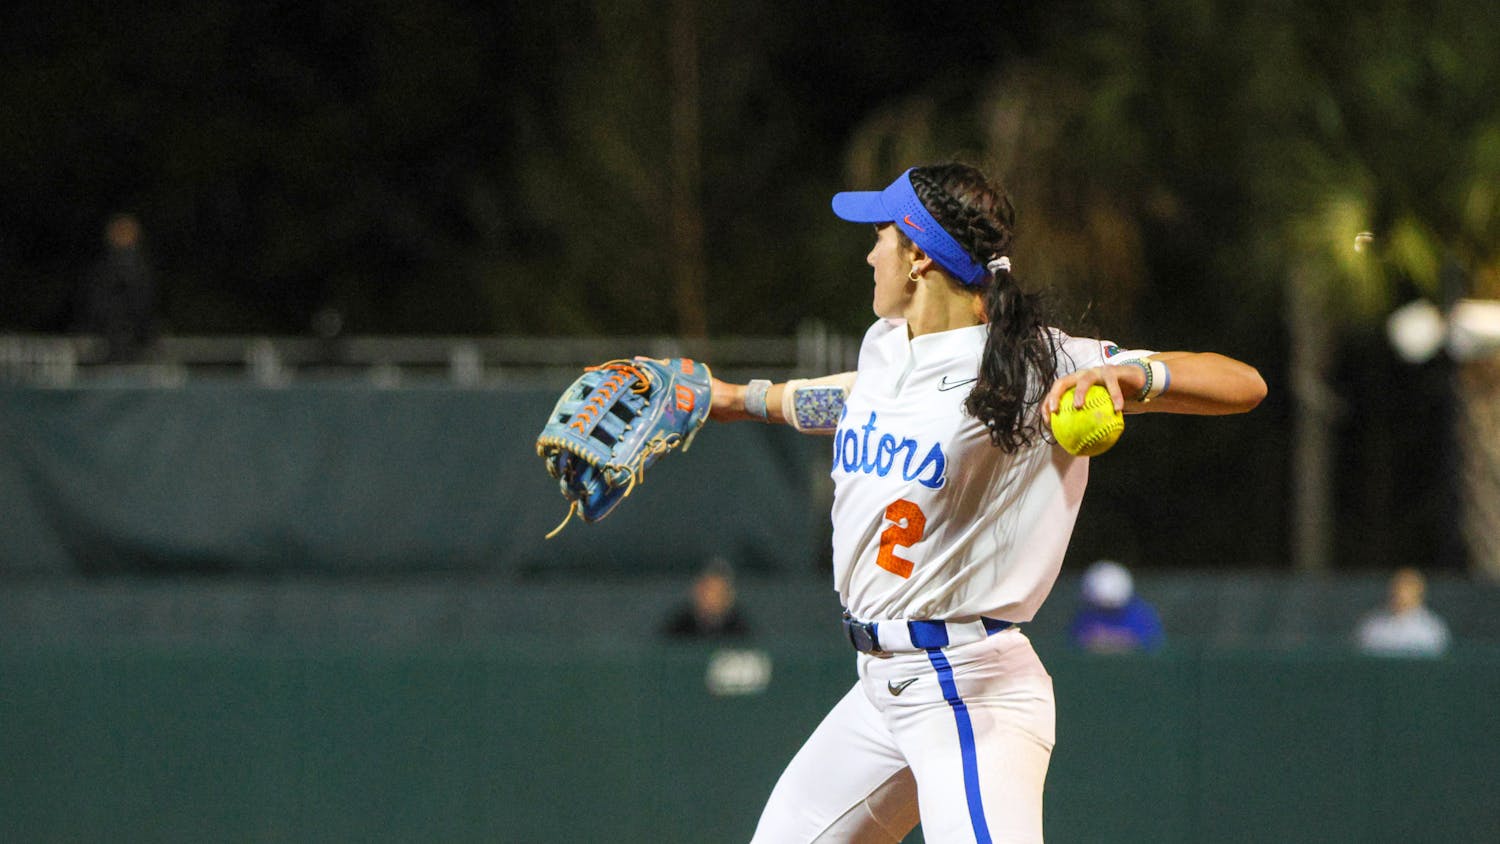 Florida infielder Avery Goelz throws the ball in the Gators' 3-0 win against the Central Florida Knights Wednesday, March 8, 2023